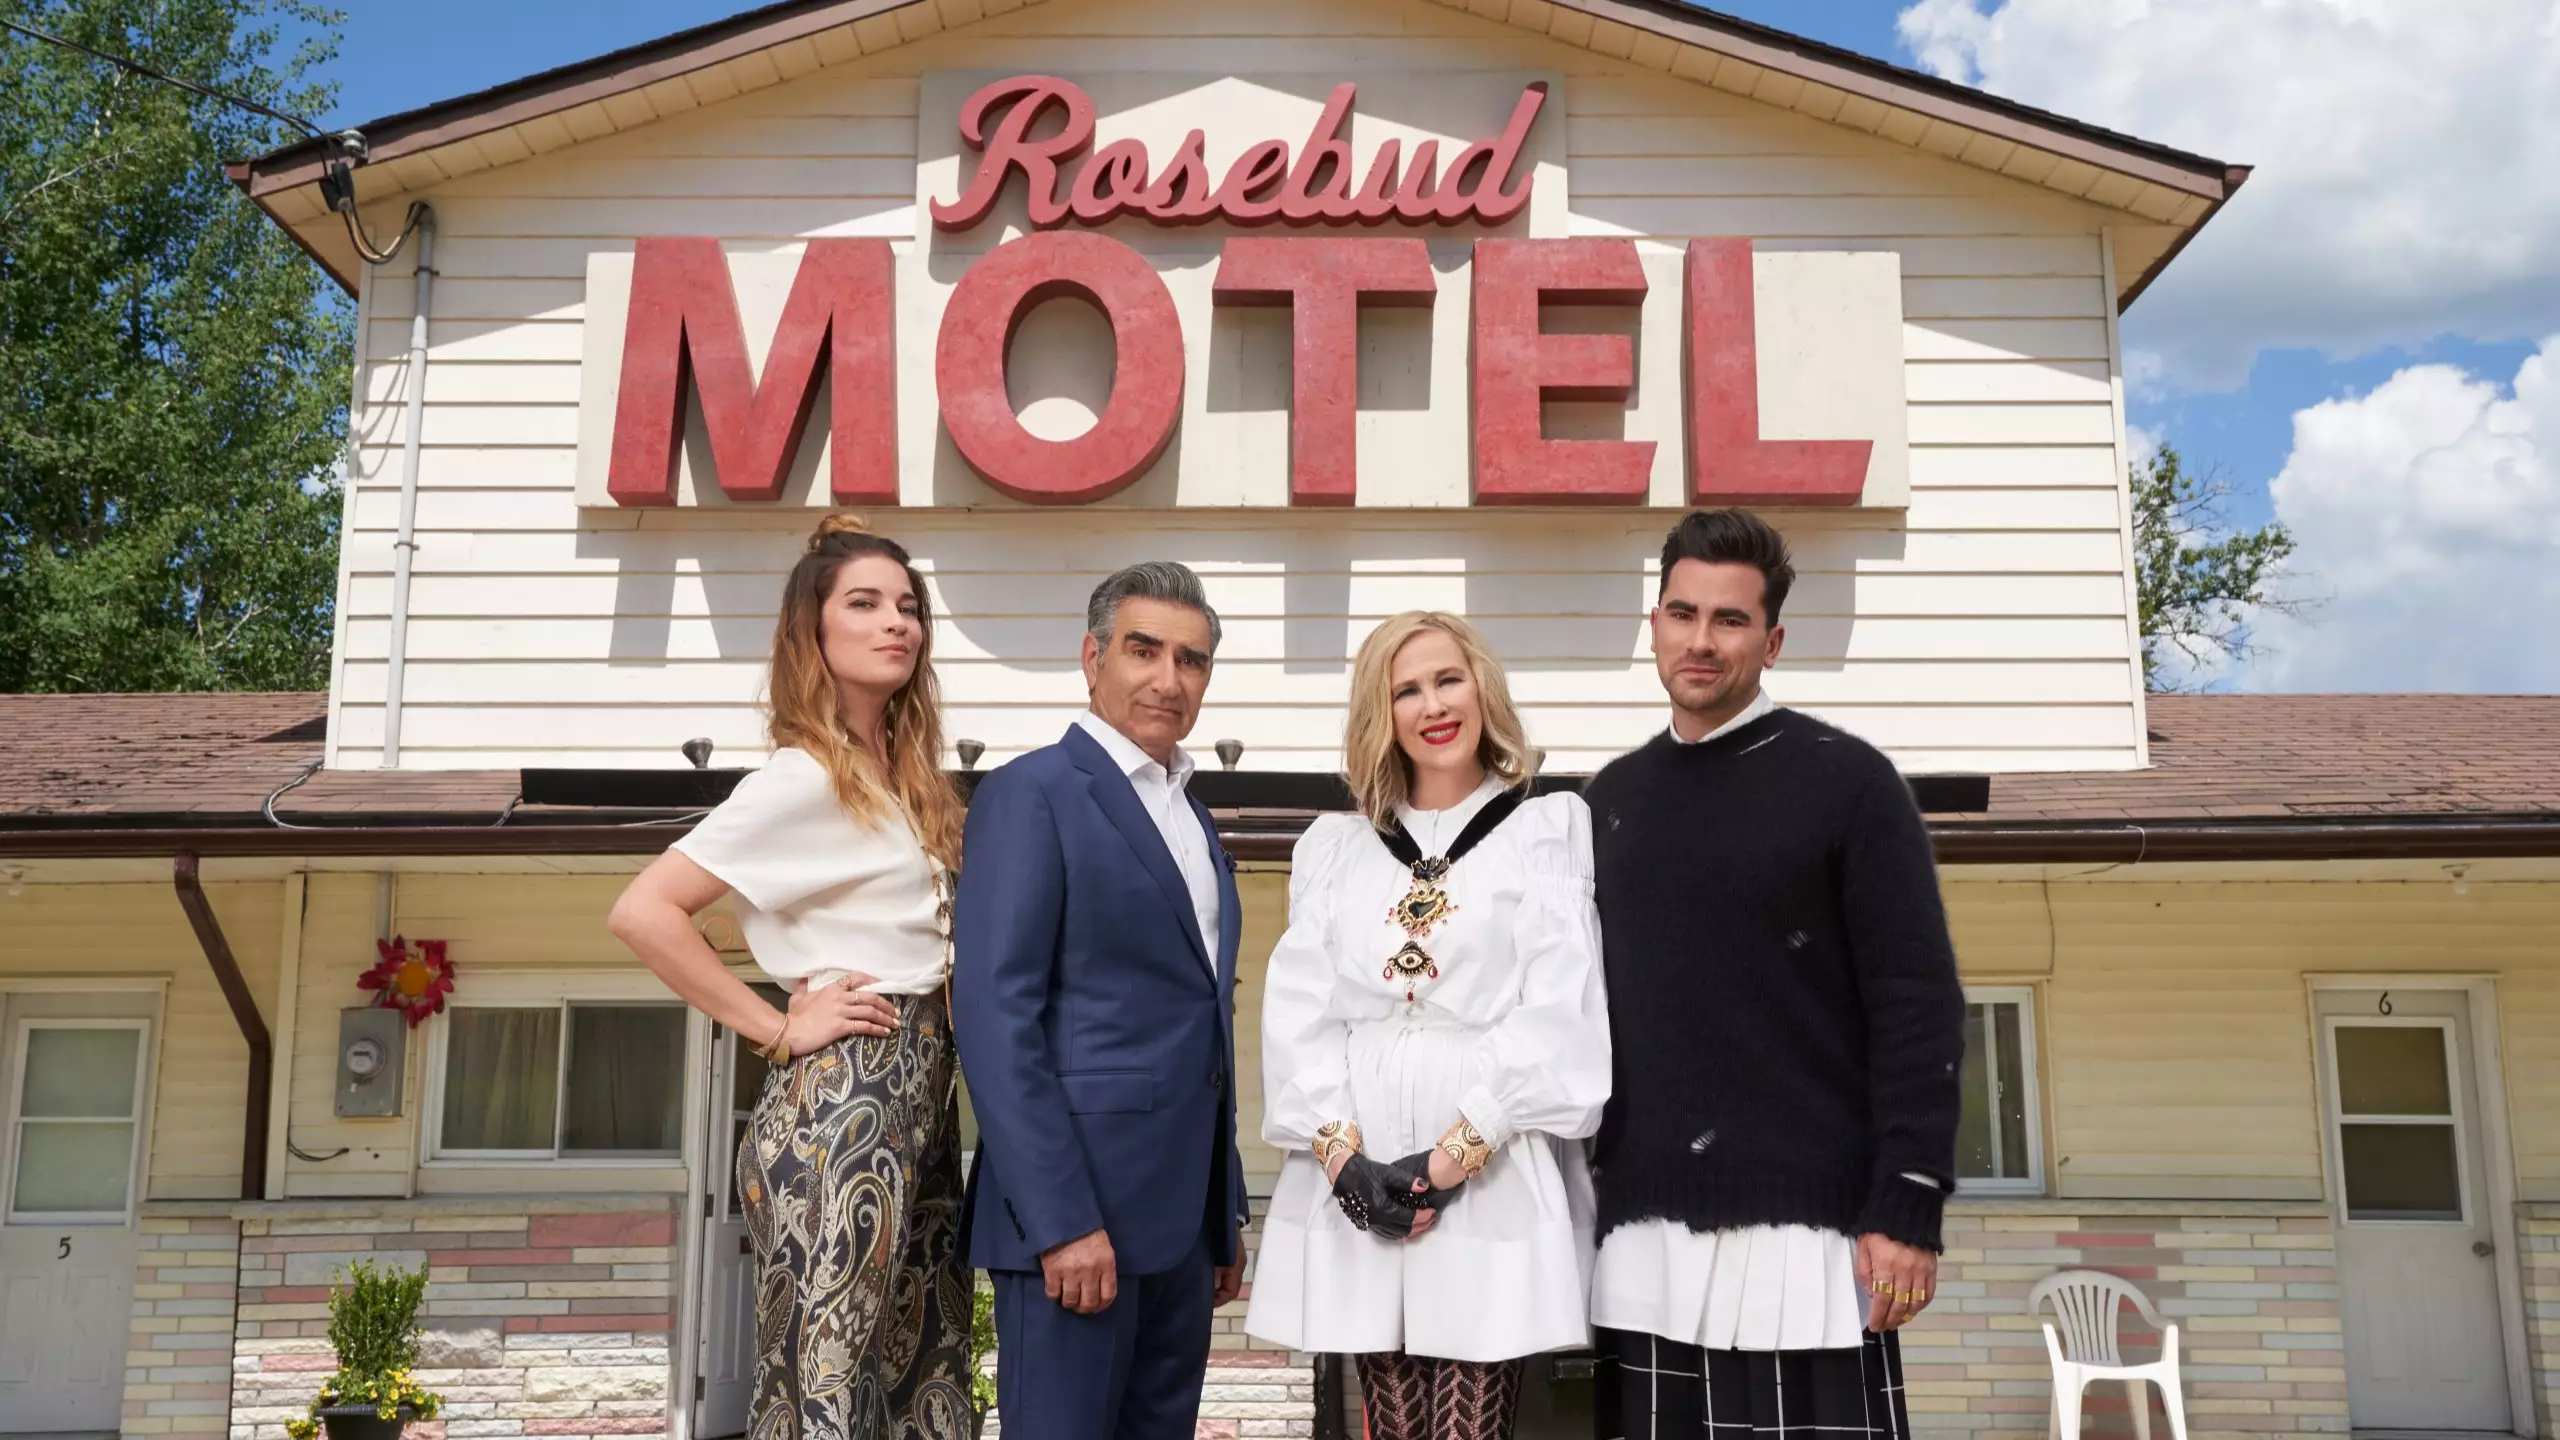 The Rosebud Motel From Schitt’s Creek Is Now Up For Sale